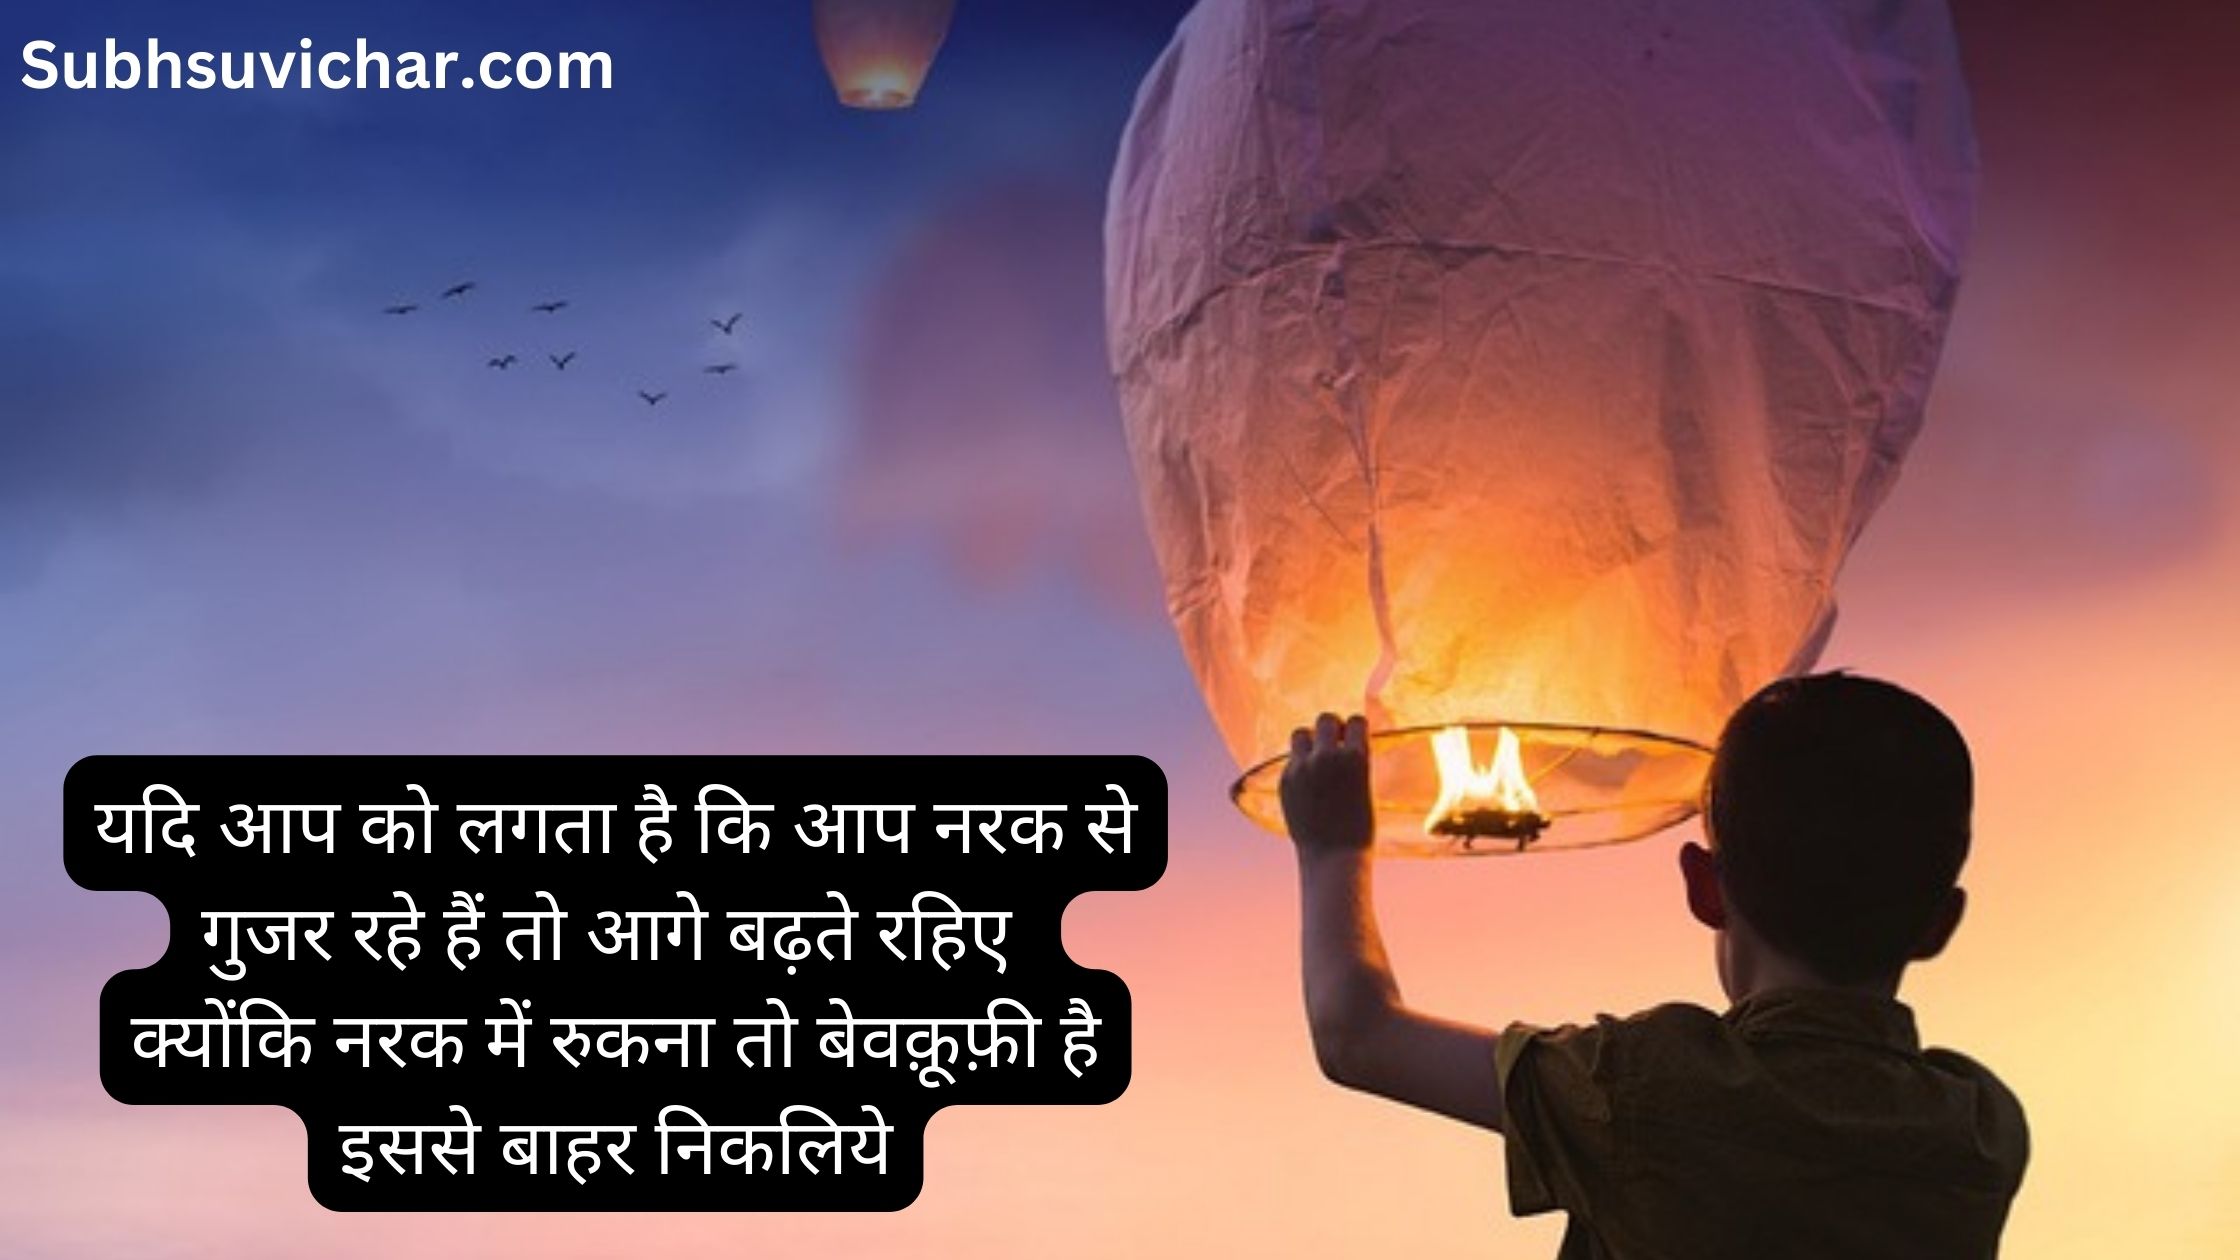 This post contains great collection of suvichar photos in hindi font with high quality images for your whatsapp and facebook status.